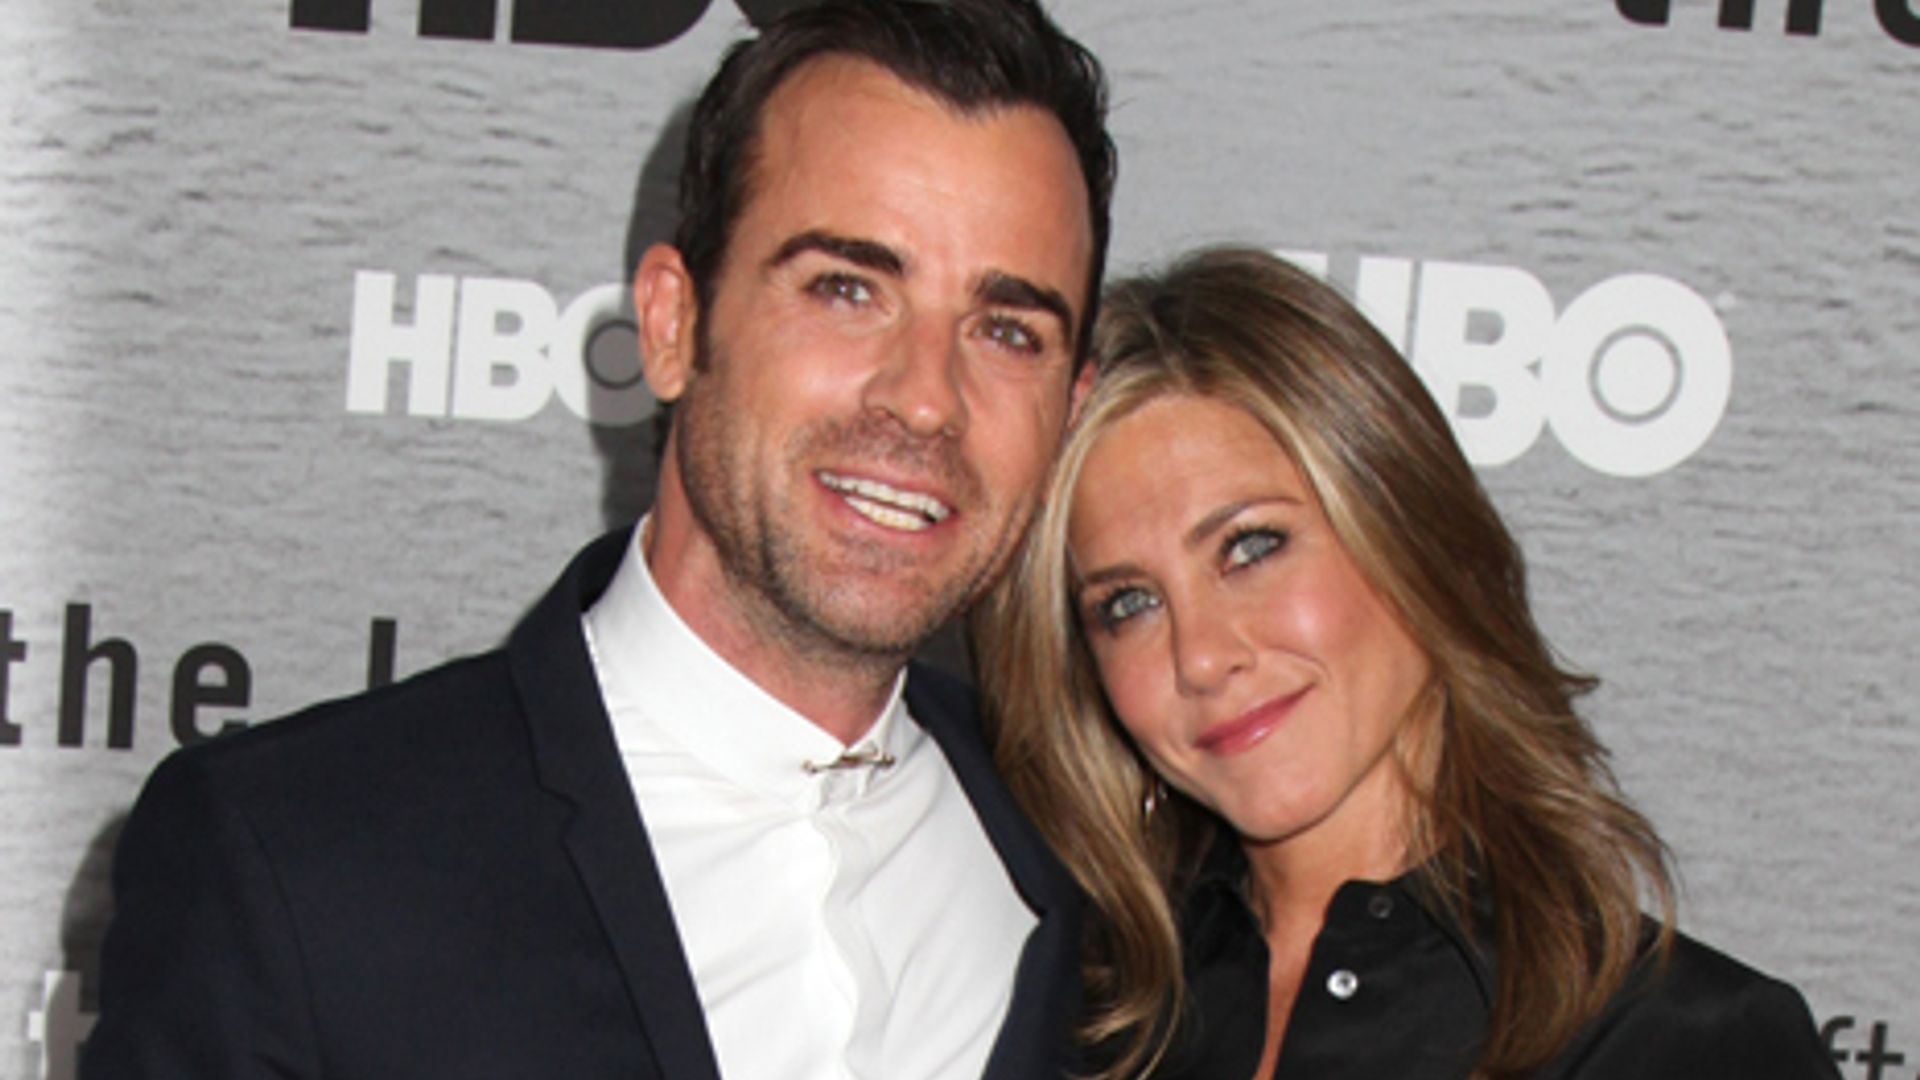 Jennifer Aniston and Justin Theroux are married